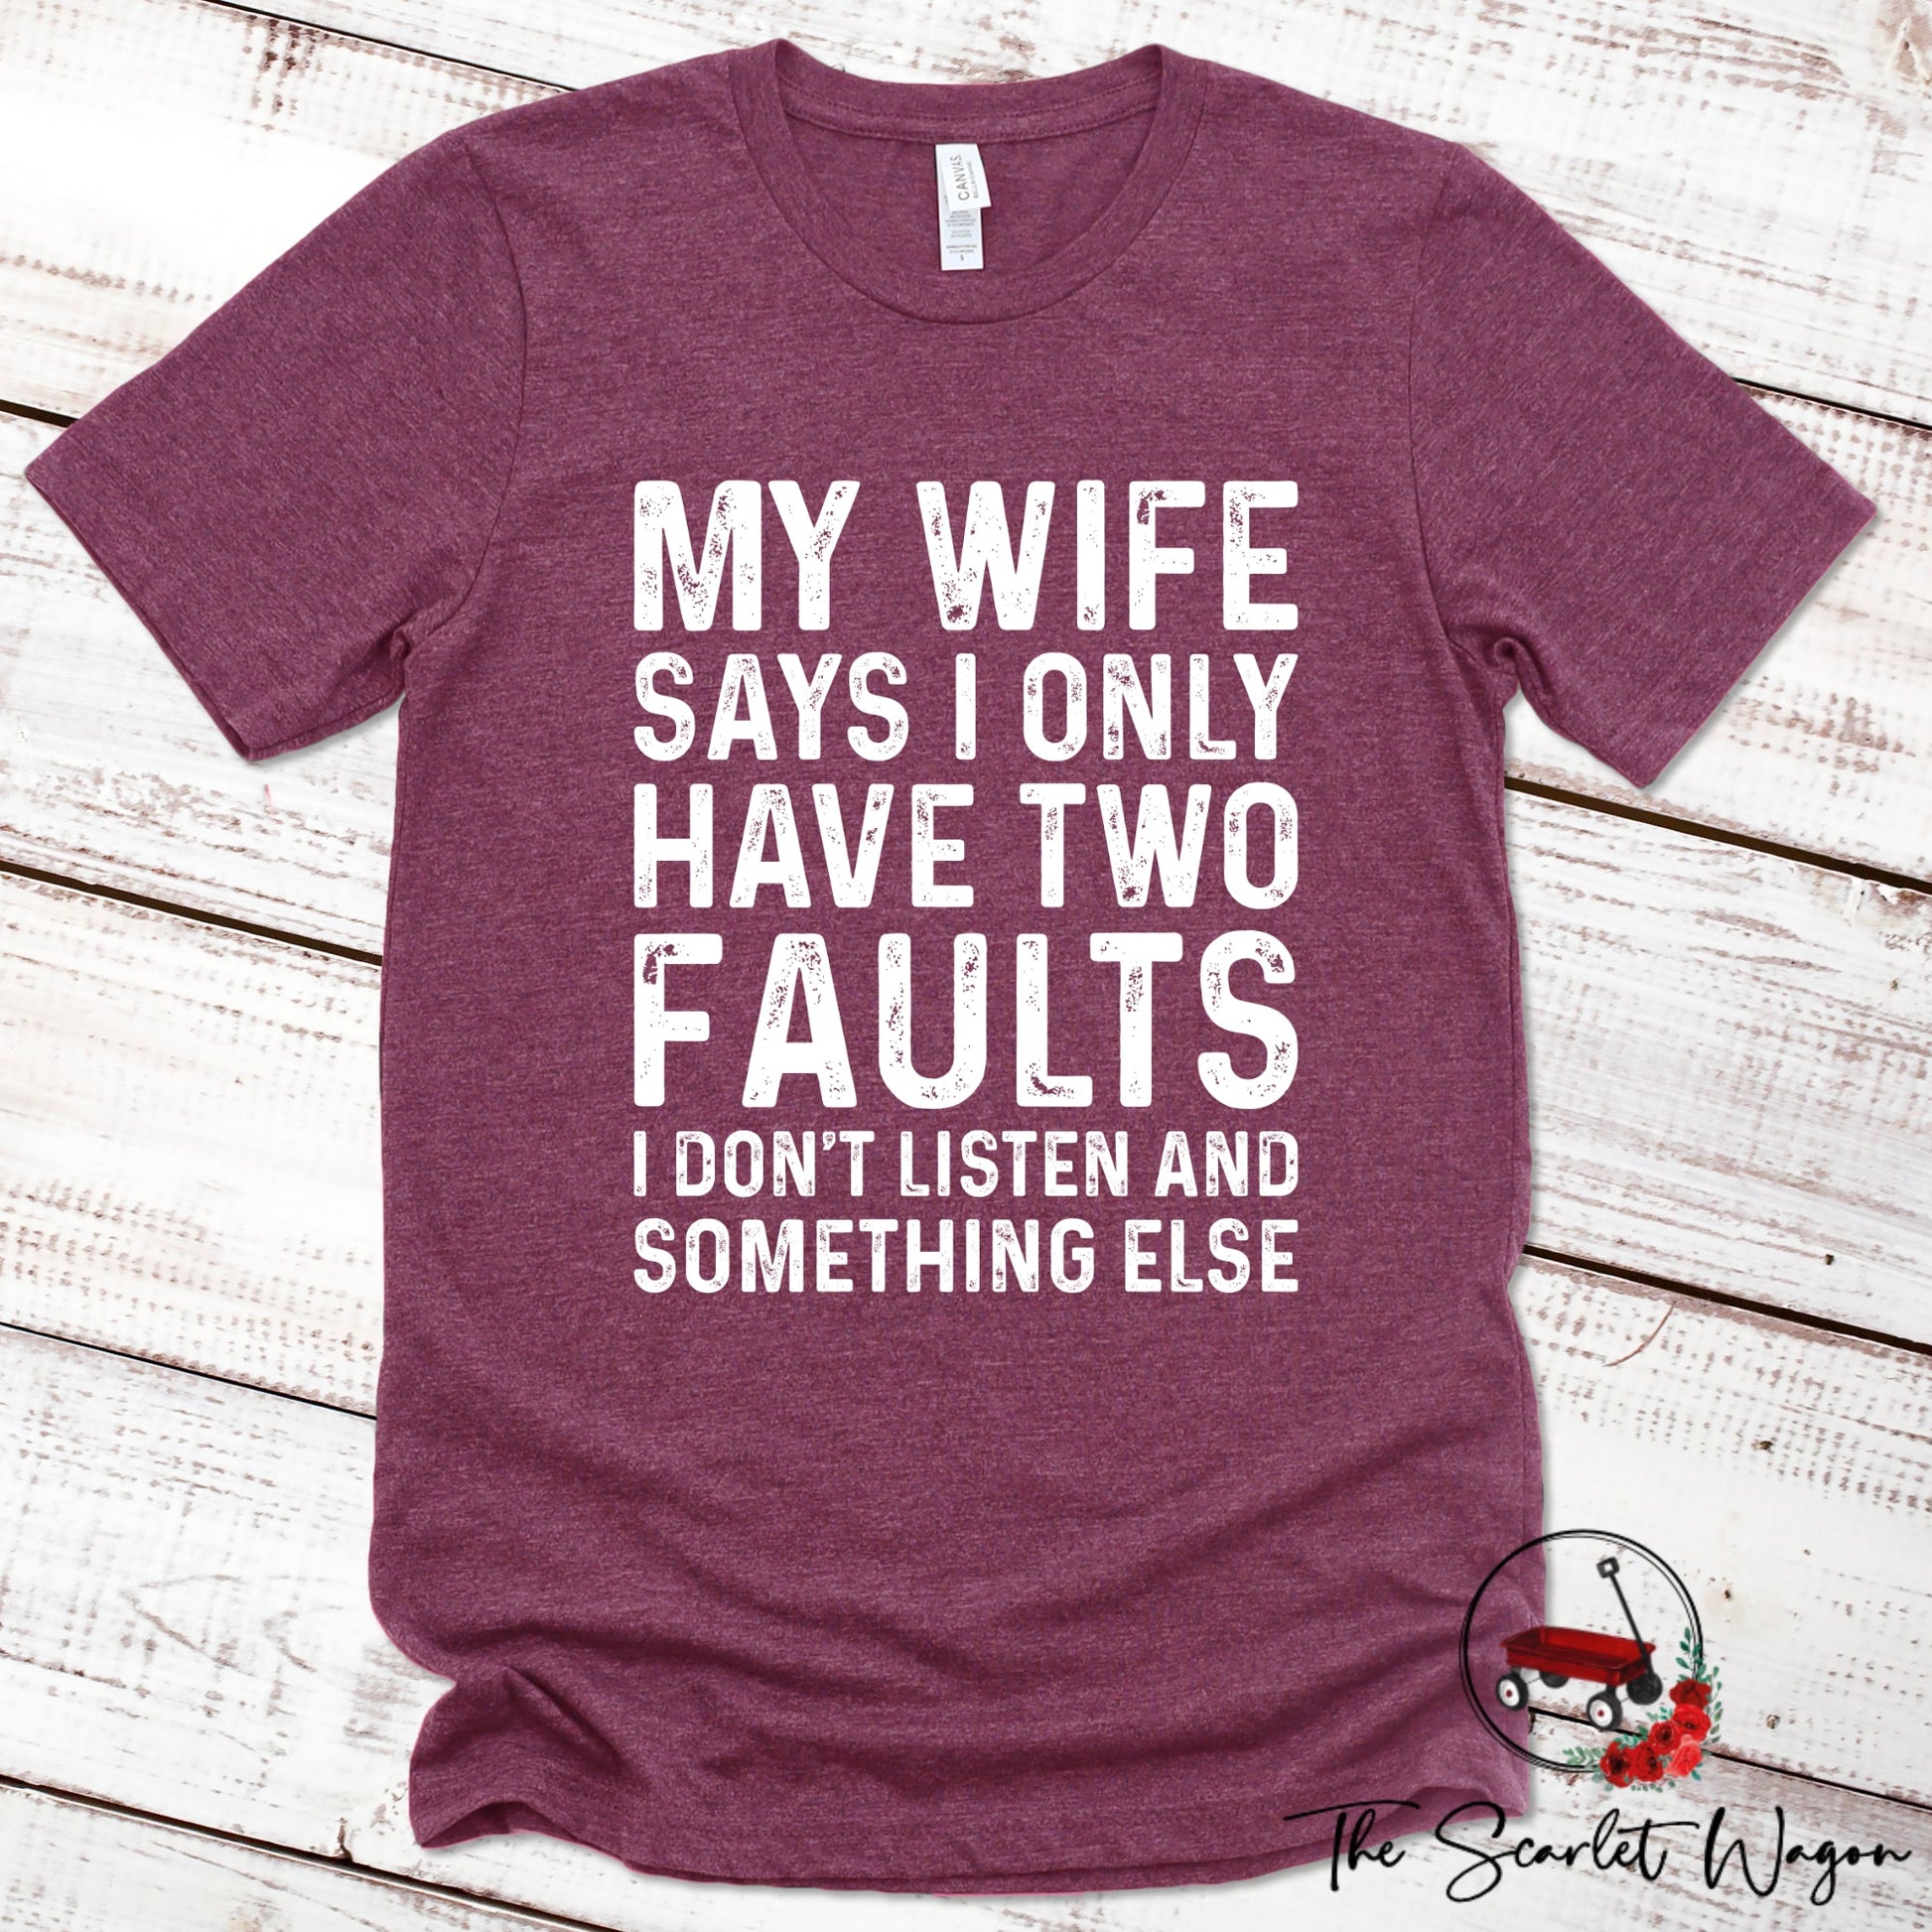 My Wife Says I Have Two Faults Premium Tee Scarlet Wagon Heather Maroon XS 